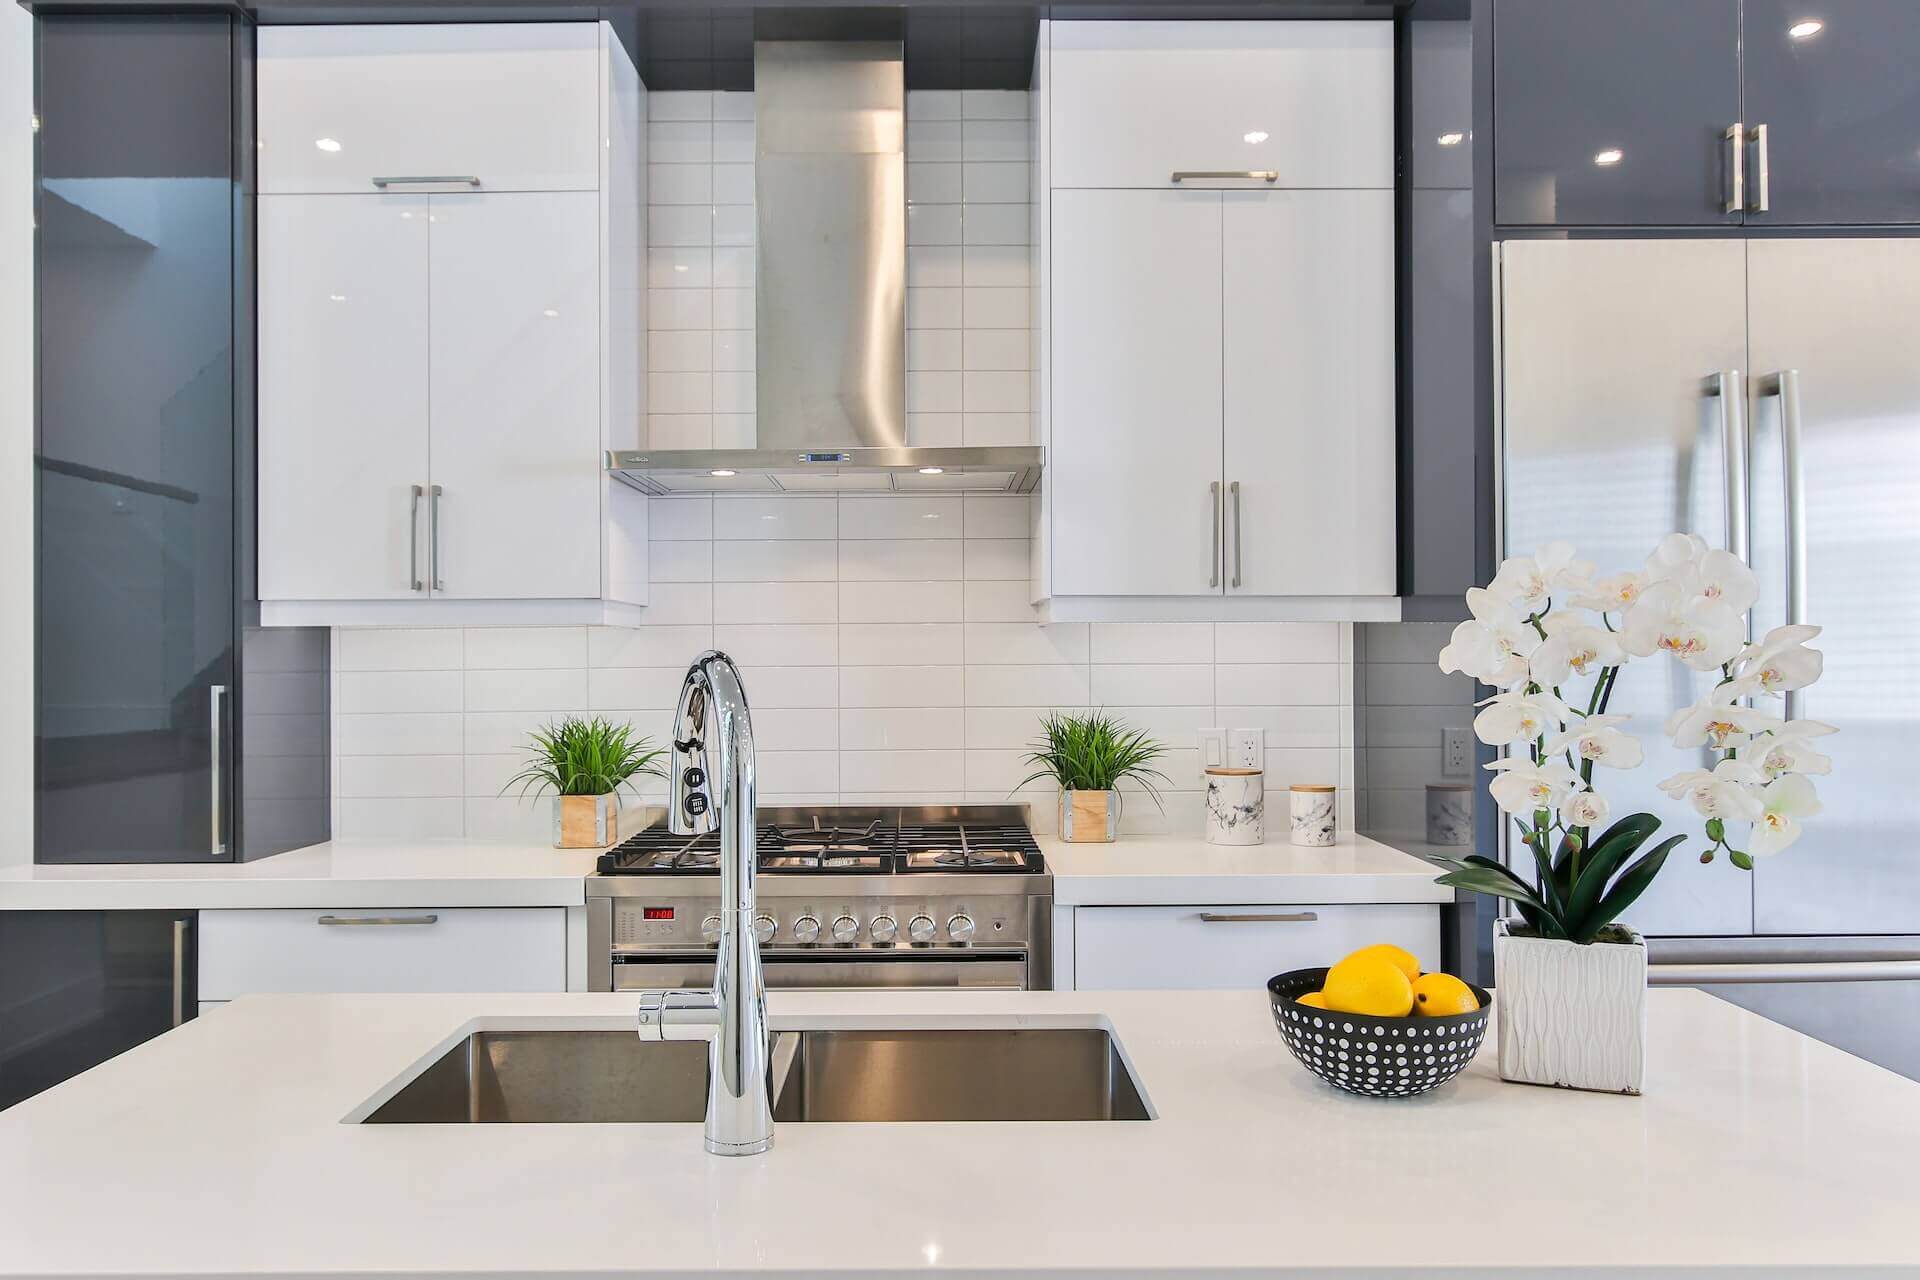 This kitchen pairs a shiny silver faucet with silver cabinet pulls